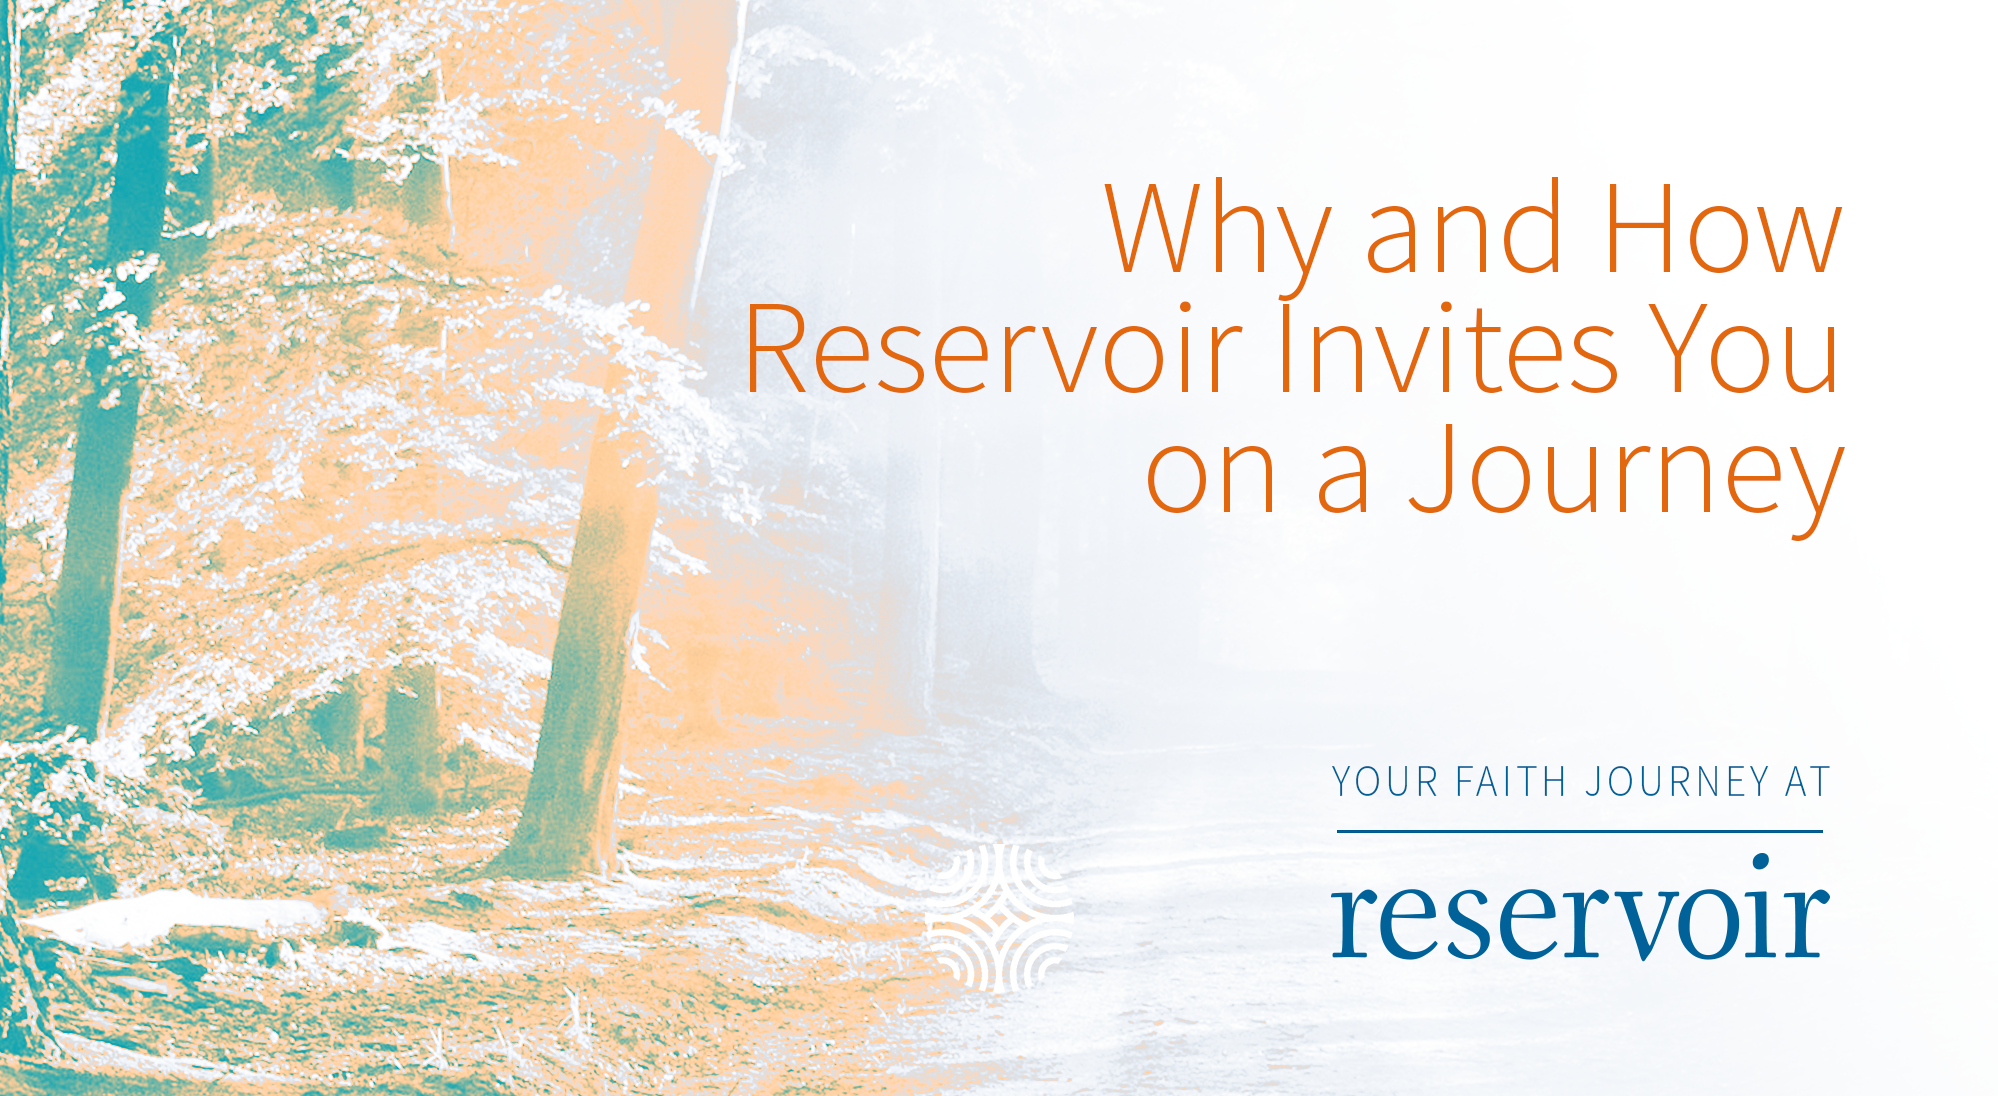 background: orange and blue forest scene. text: why and how Reservoir invites you on a journey